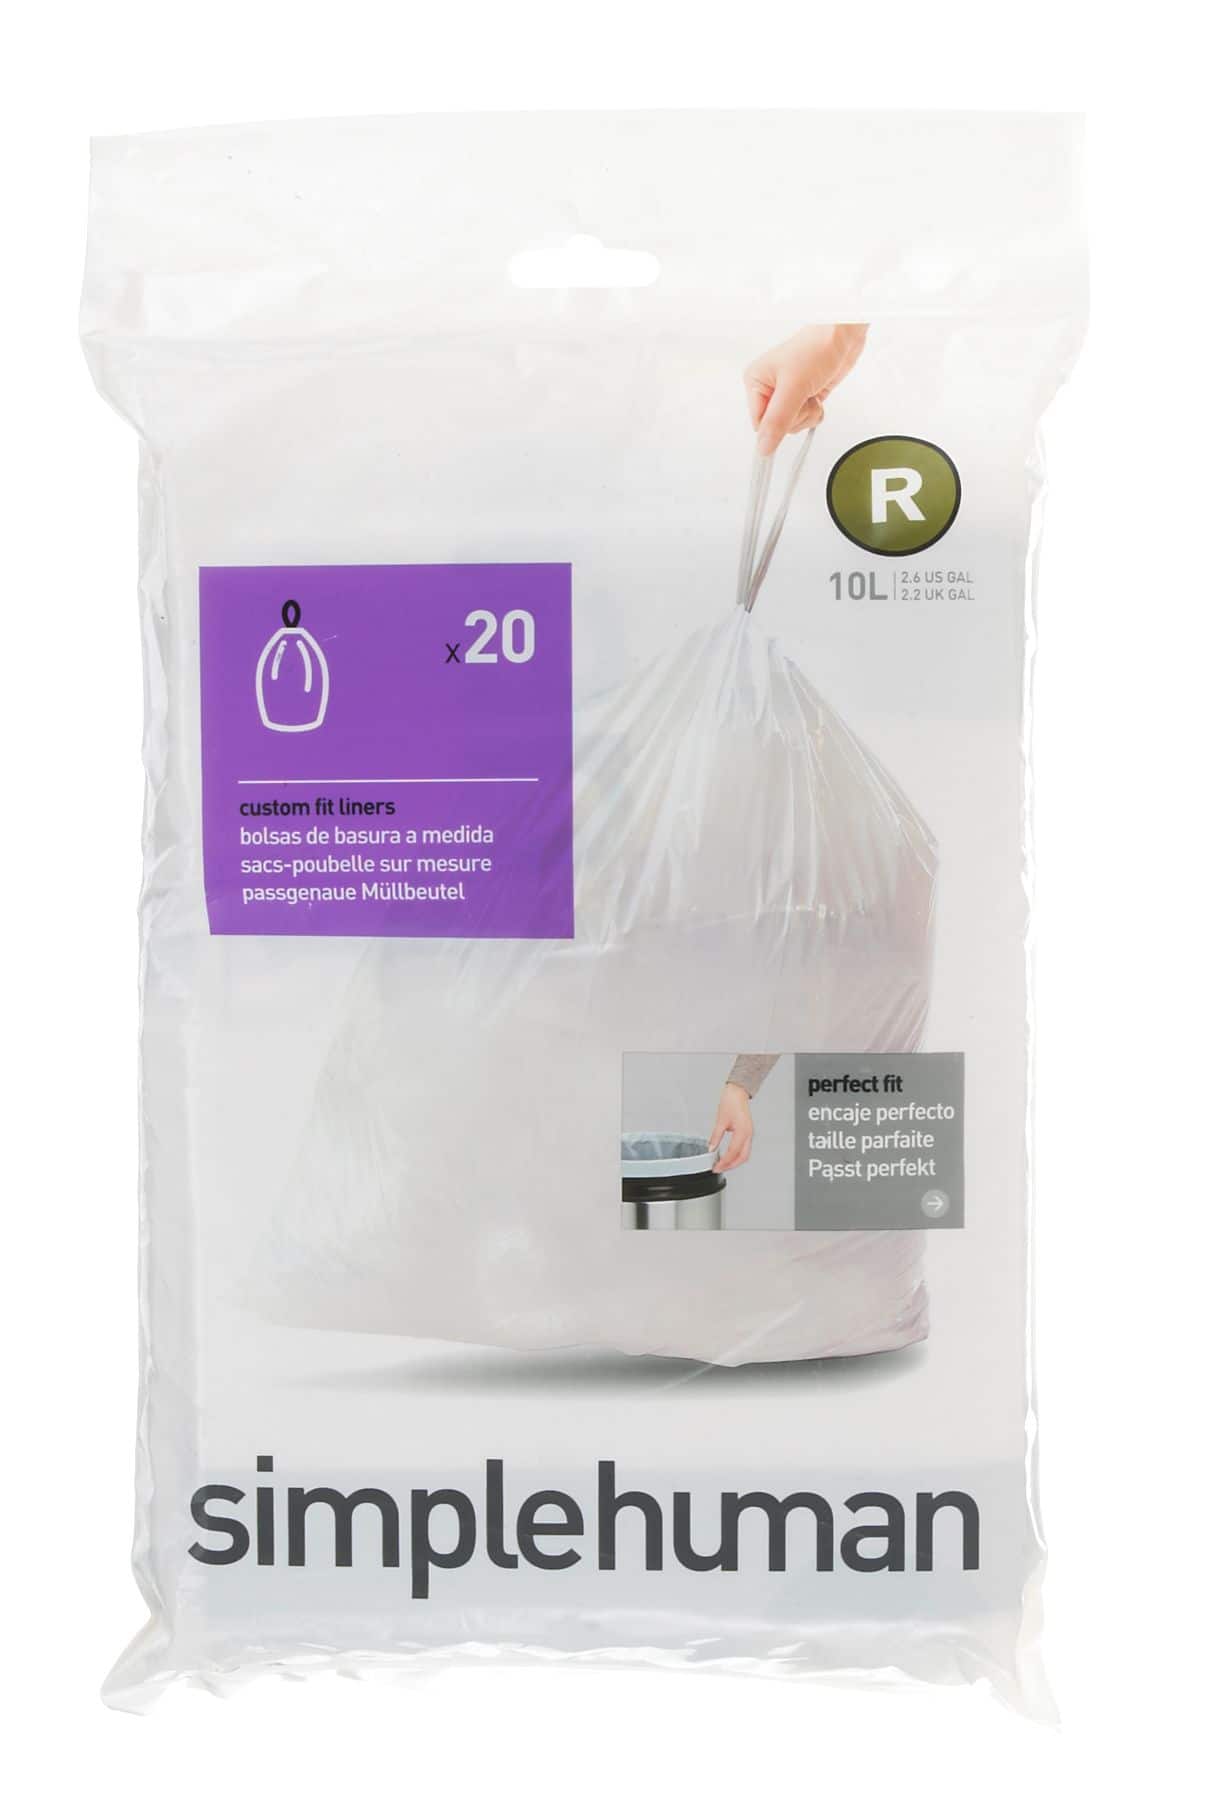 https://media-www.canadiantire.ca/product/living/cleaning/refuse-bags/1423305/simplehuman-liner-r-20-pack-0150d569-3aec-4b48-b181-9f2ead48381a-jpgrendition.jpg